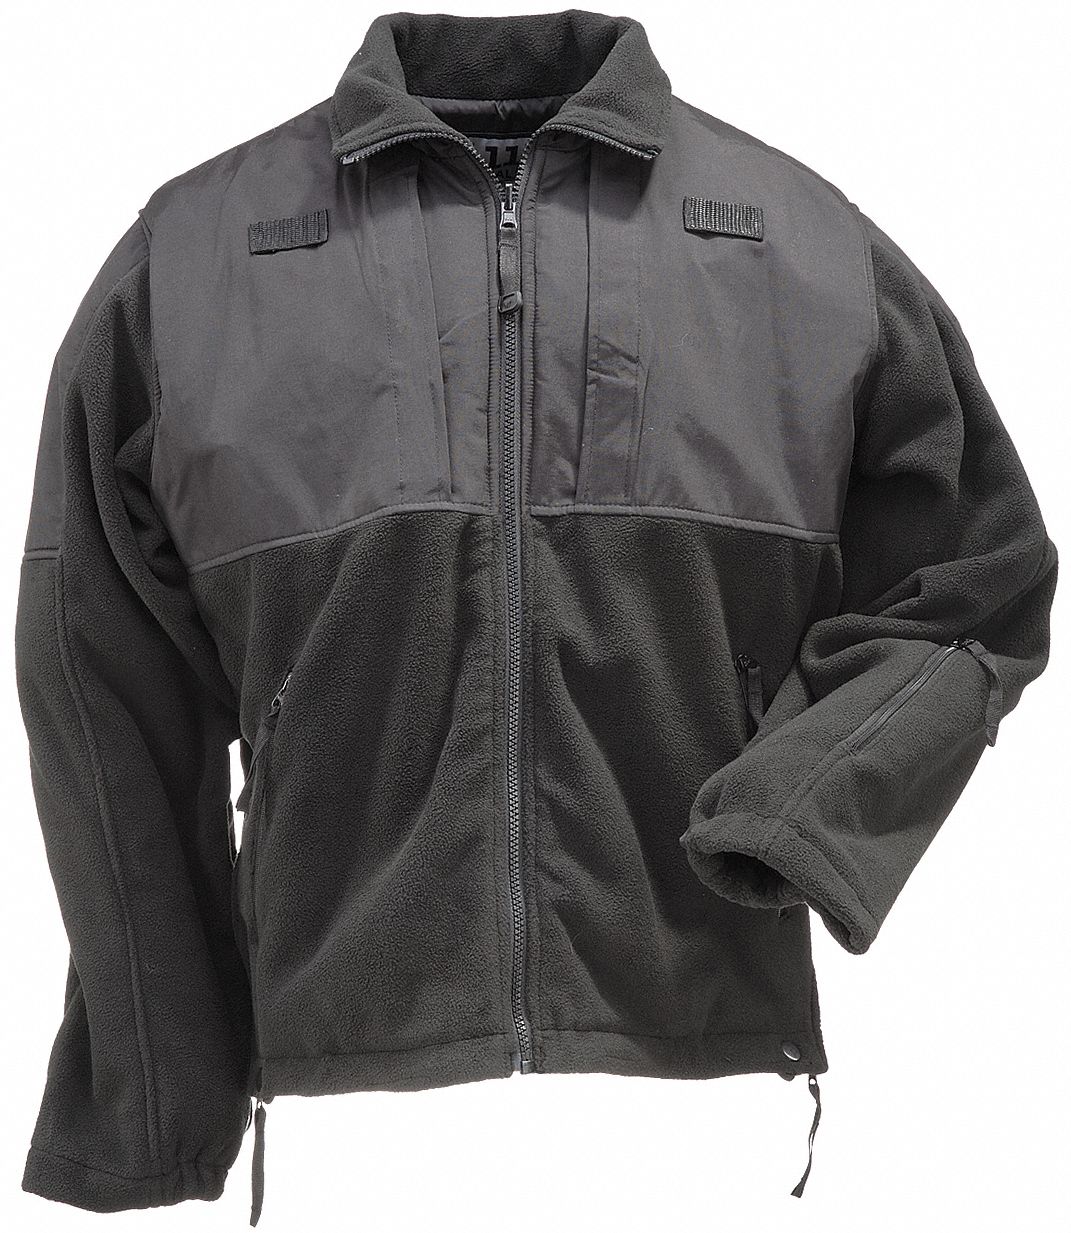 5.11 TACTICAL, L, 42 in to 44 in Fits Chest Size, Tactical Fleece ...